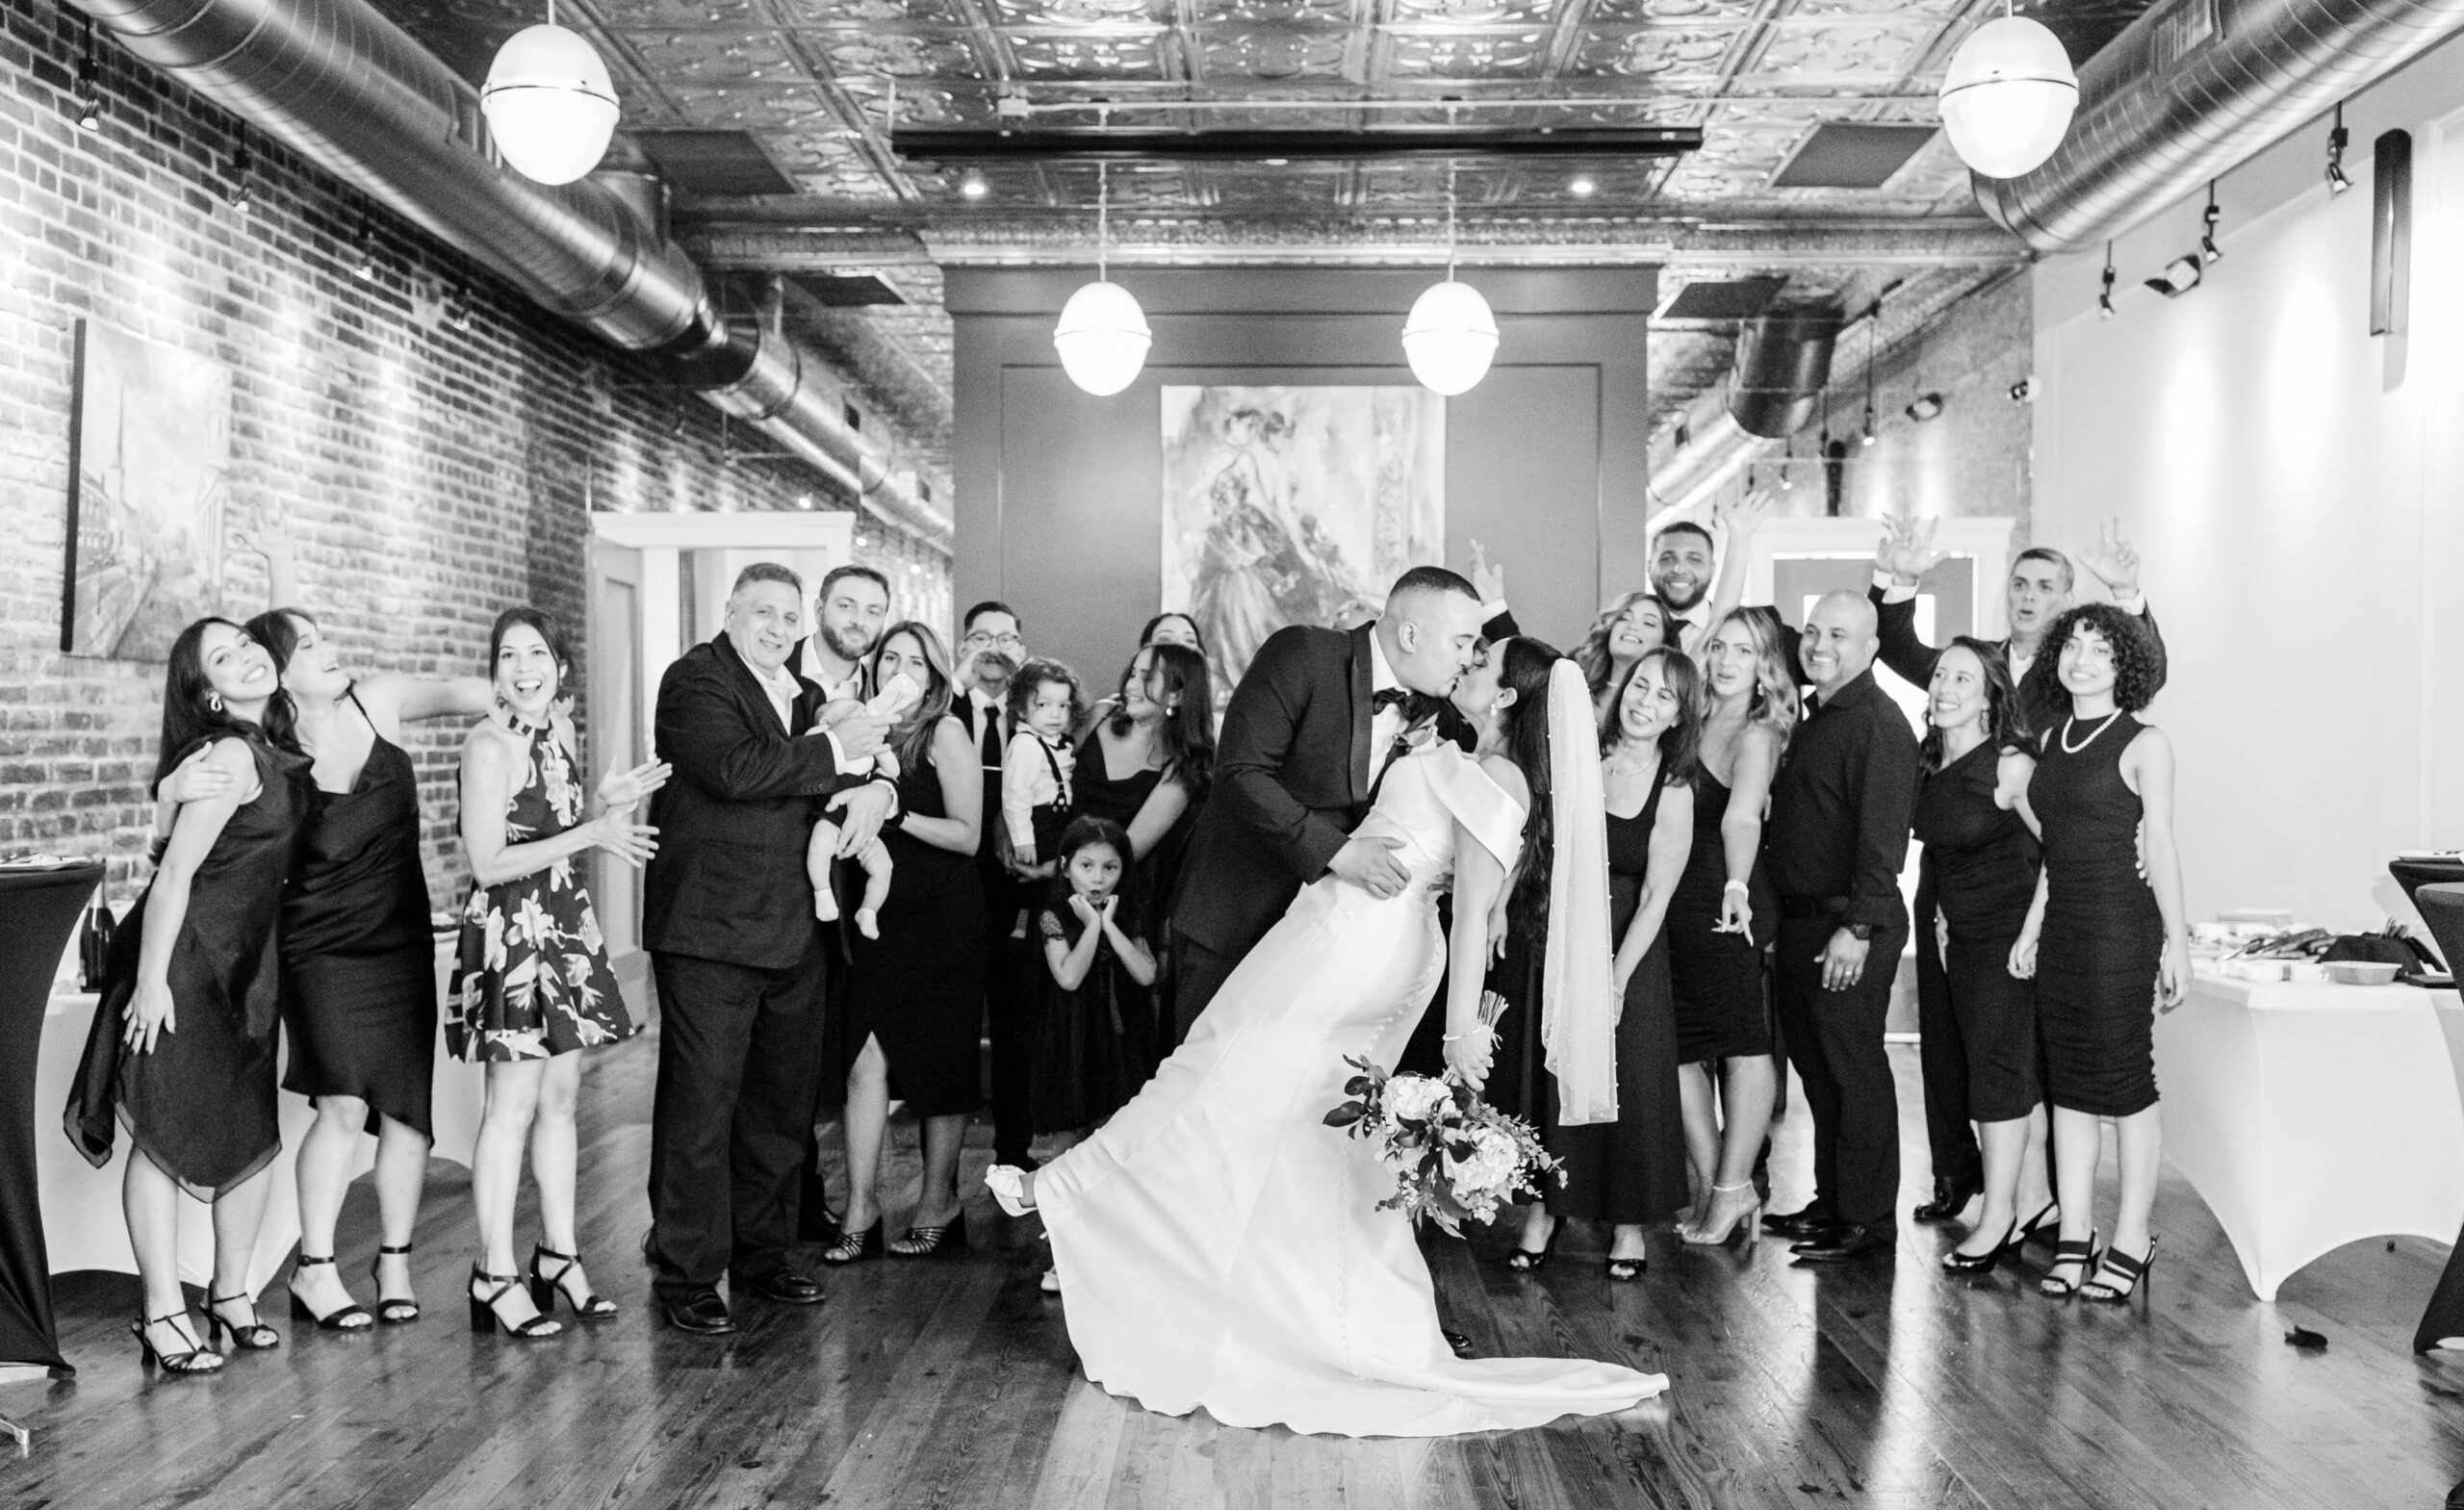 Groom dips bride and everyone celebrates a wedding at the 718 Venue in Fredericksburg, Virginia. Taken by Bethany Aubre Photography.